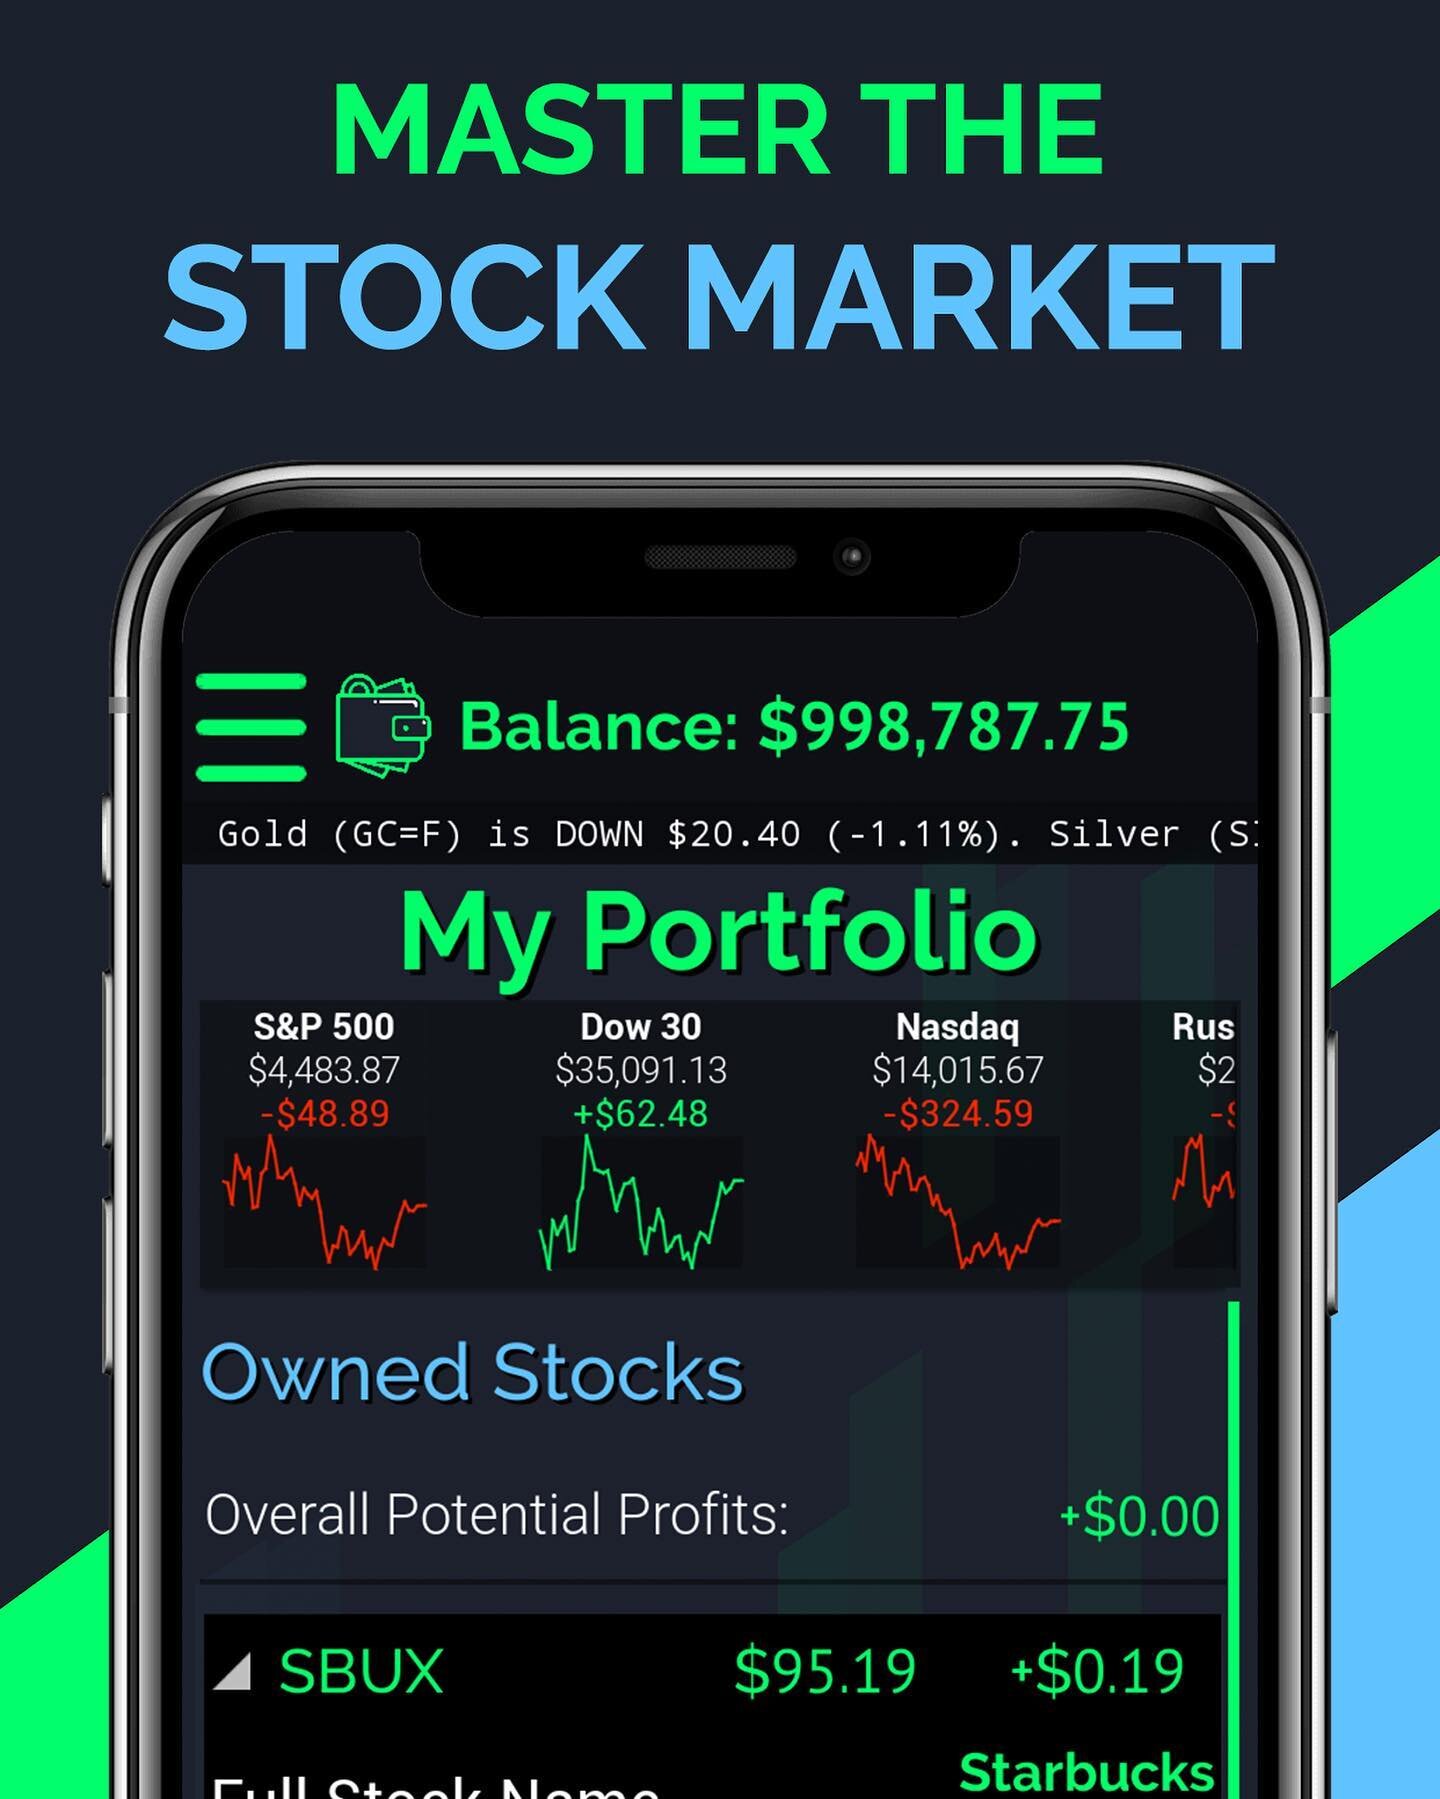 Play will you learn and learn while you play. Master the stock market with Spondooli today!